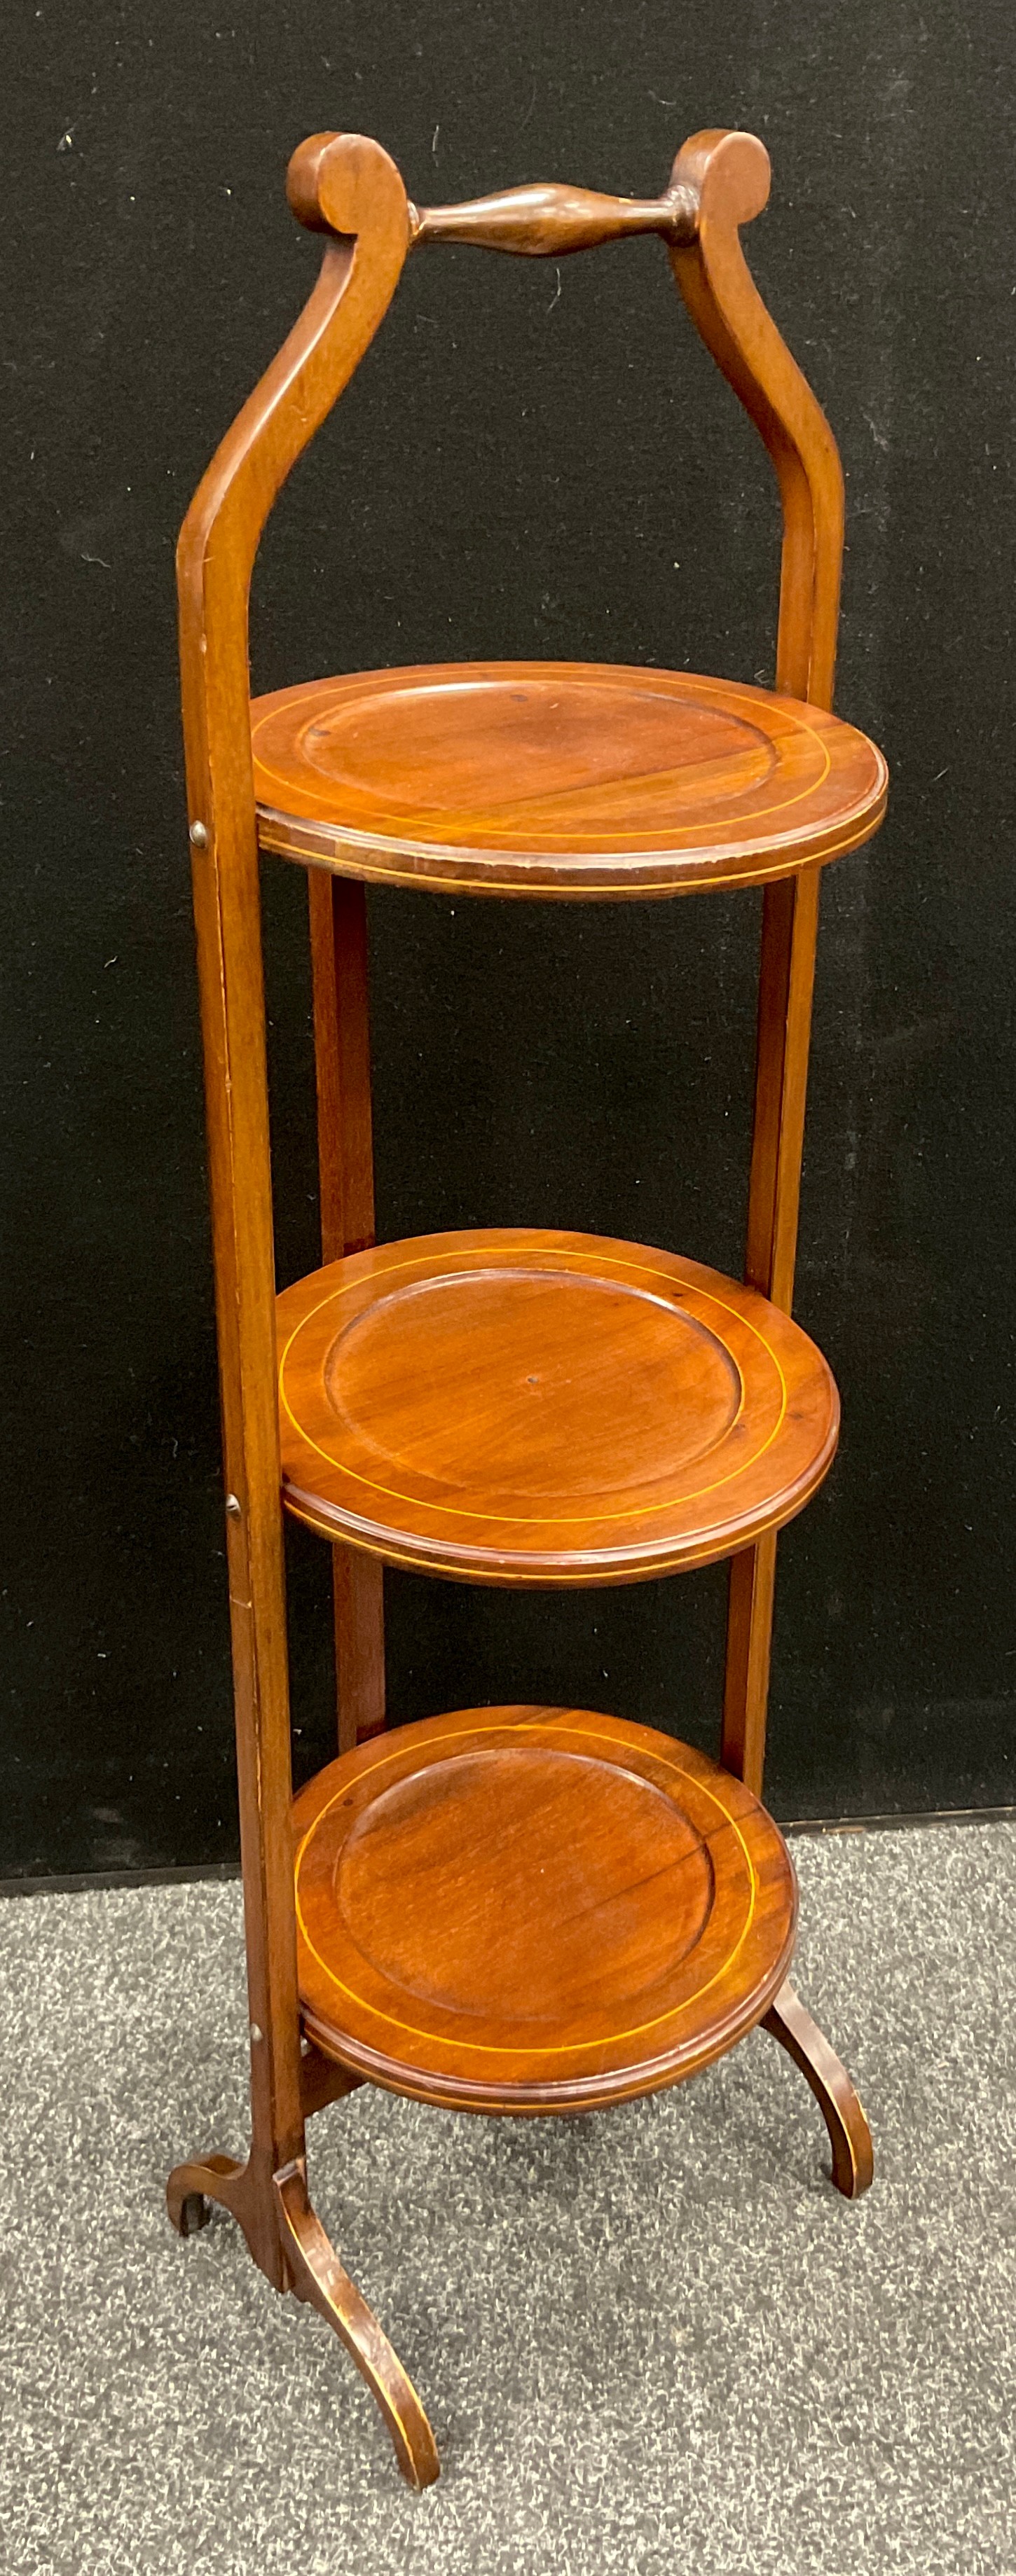 An Edwardian mahogany three tier folding cake stand, outlined with boxwood stringing, c.,1905